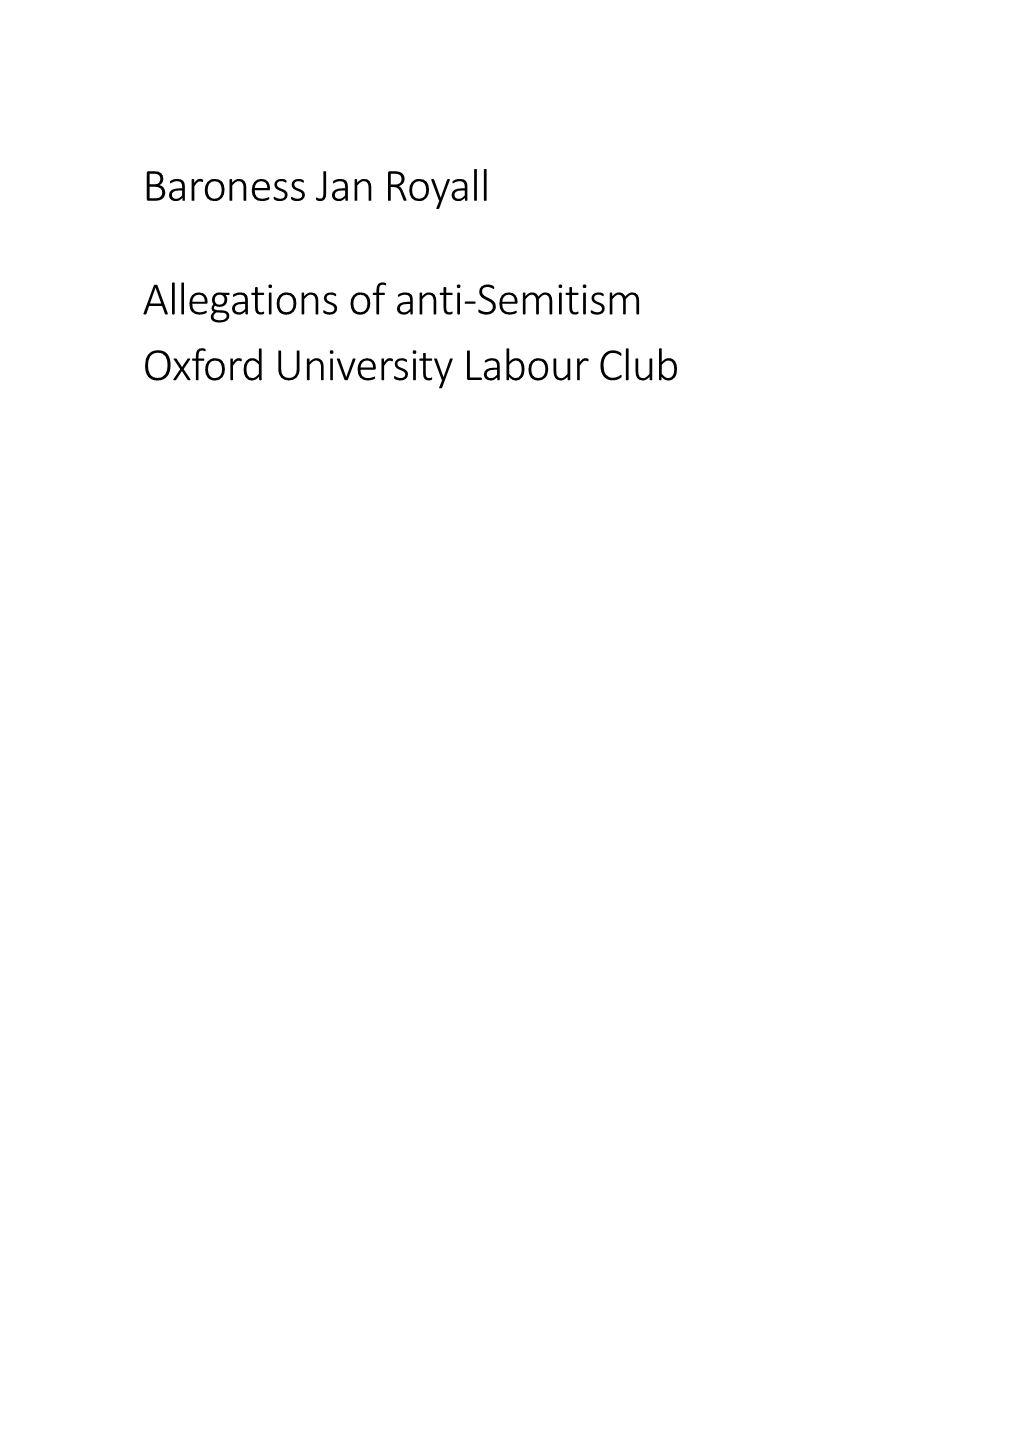 Baroness Jan Royall Allegations of Anti-Semitism Oxford University Labour Club